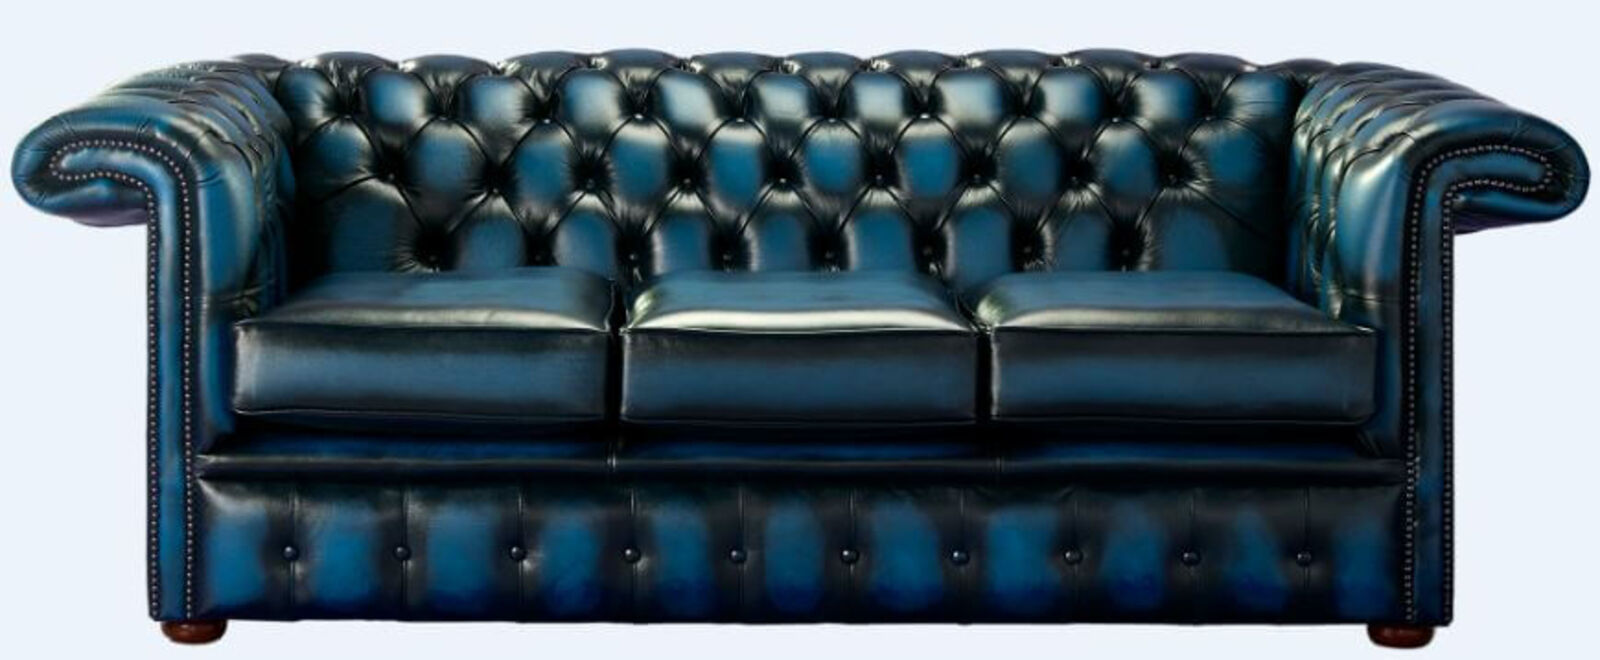 Product photograph of Chesterfield 1857 Hockey Stick 3 Seater Antique Blue Leather Sofa Offer from Designer Sofas 4U